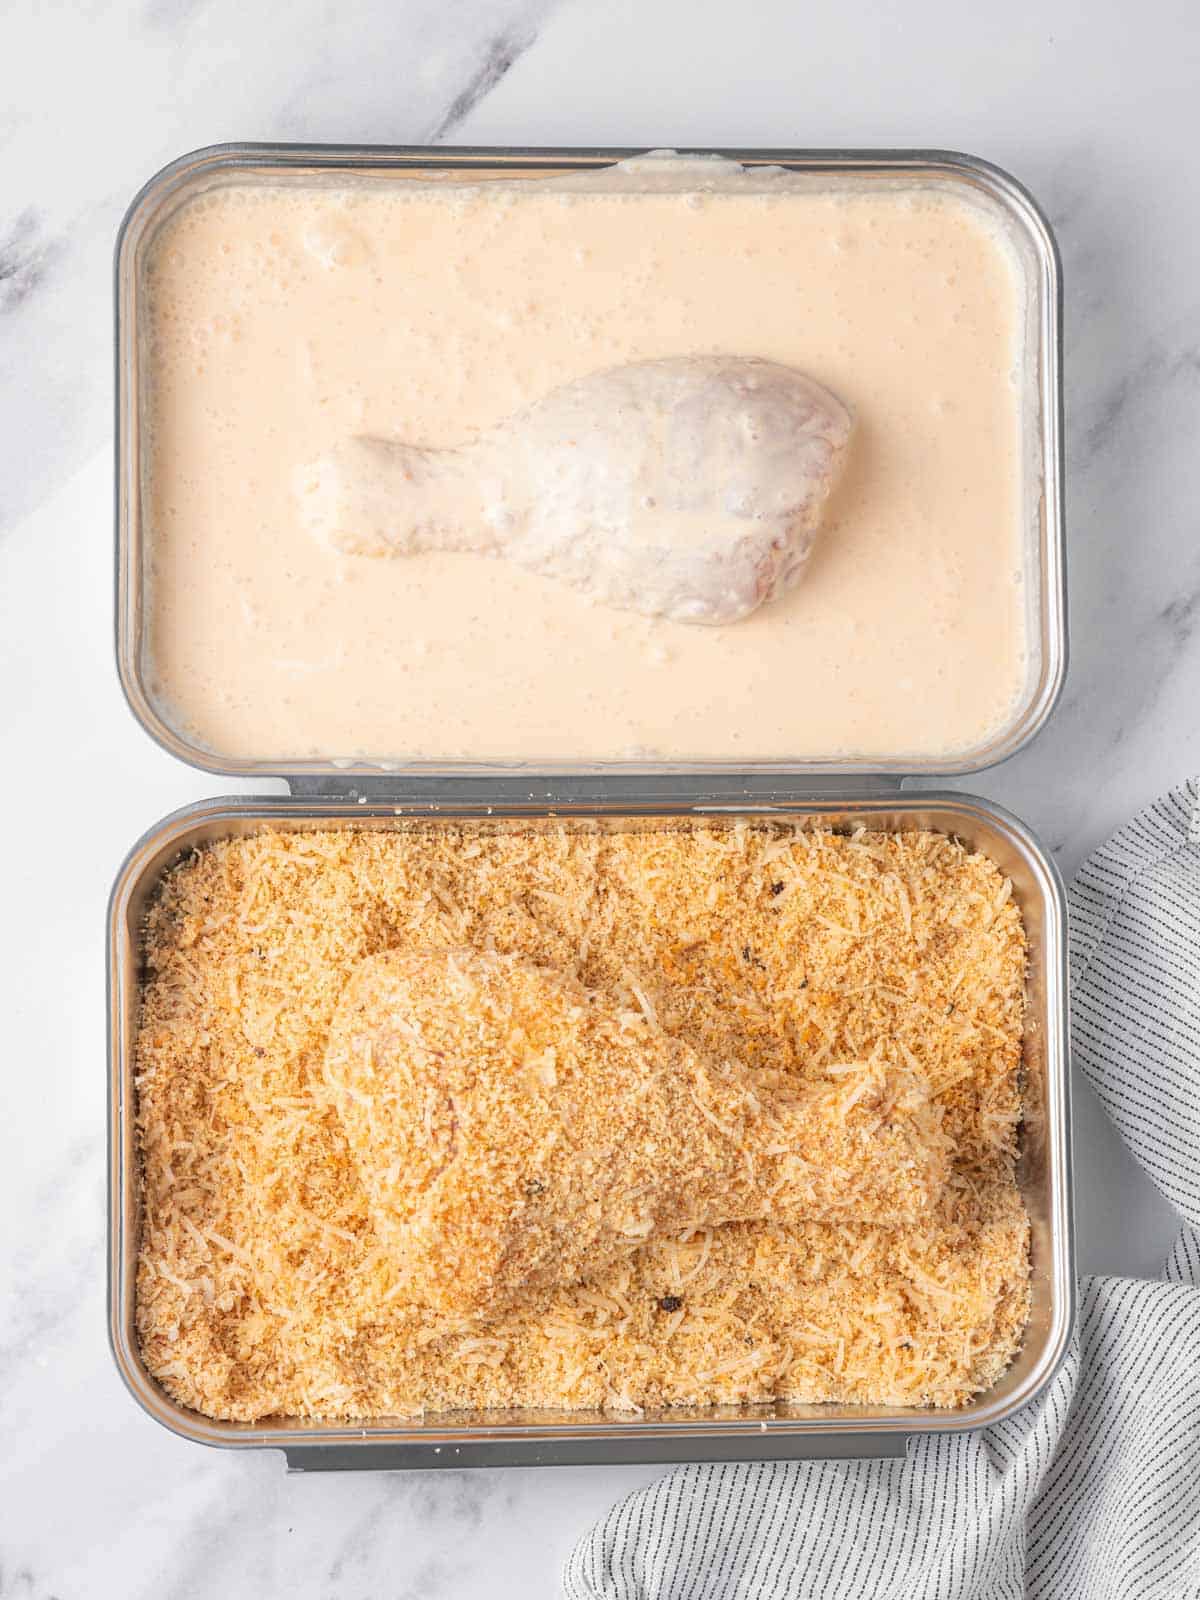 How to coat the chicken in almond flour.